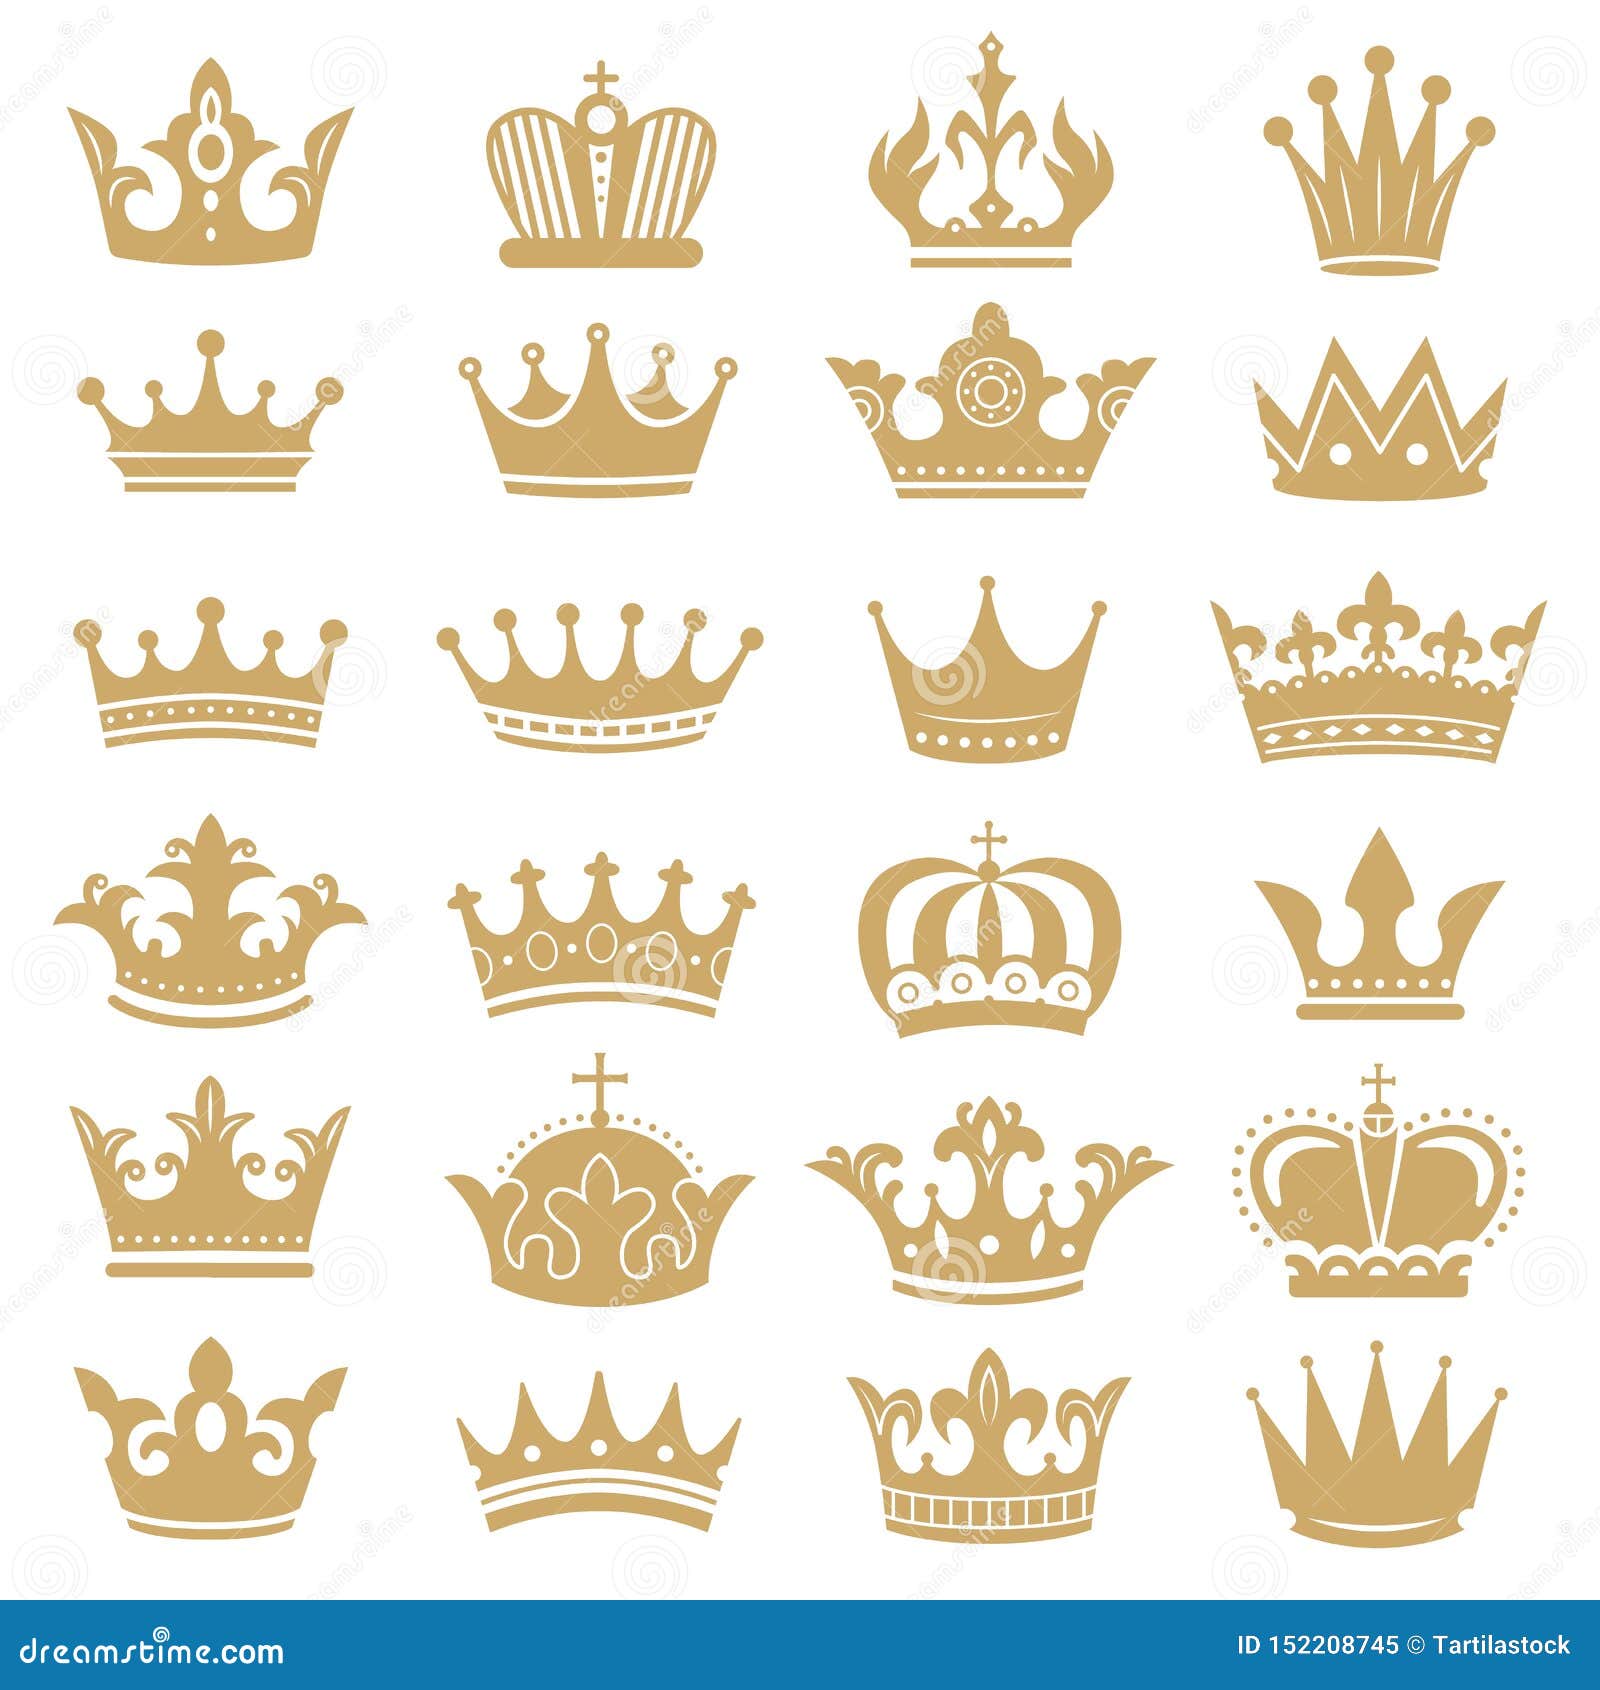 gold crown silhouette. royal crowns, coronation king and luxury queen tiara silhouettes icons  set